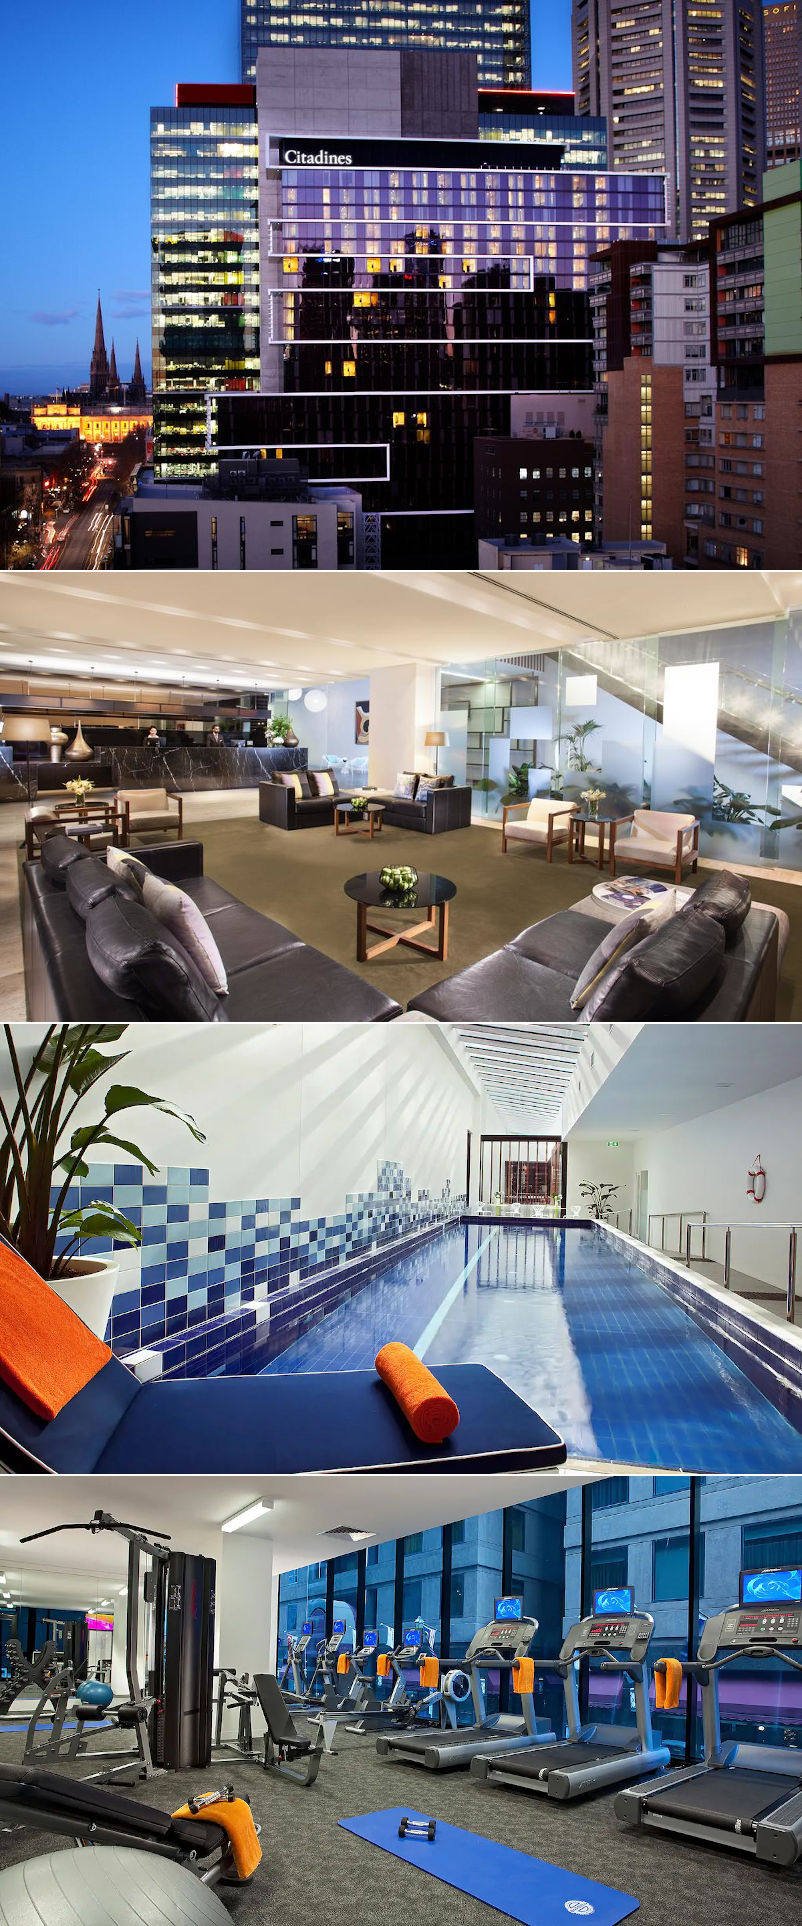 Citadines on Bourke Melbourne - Hotel and facilities